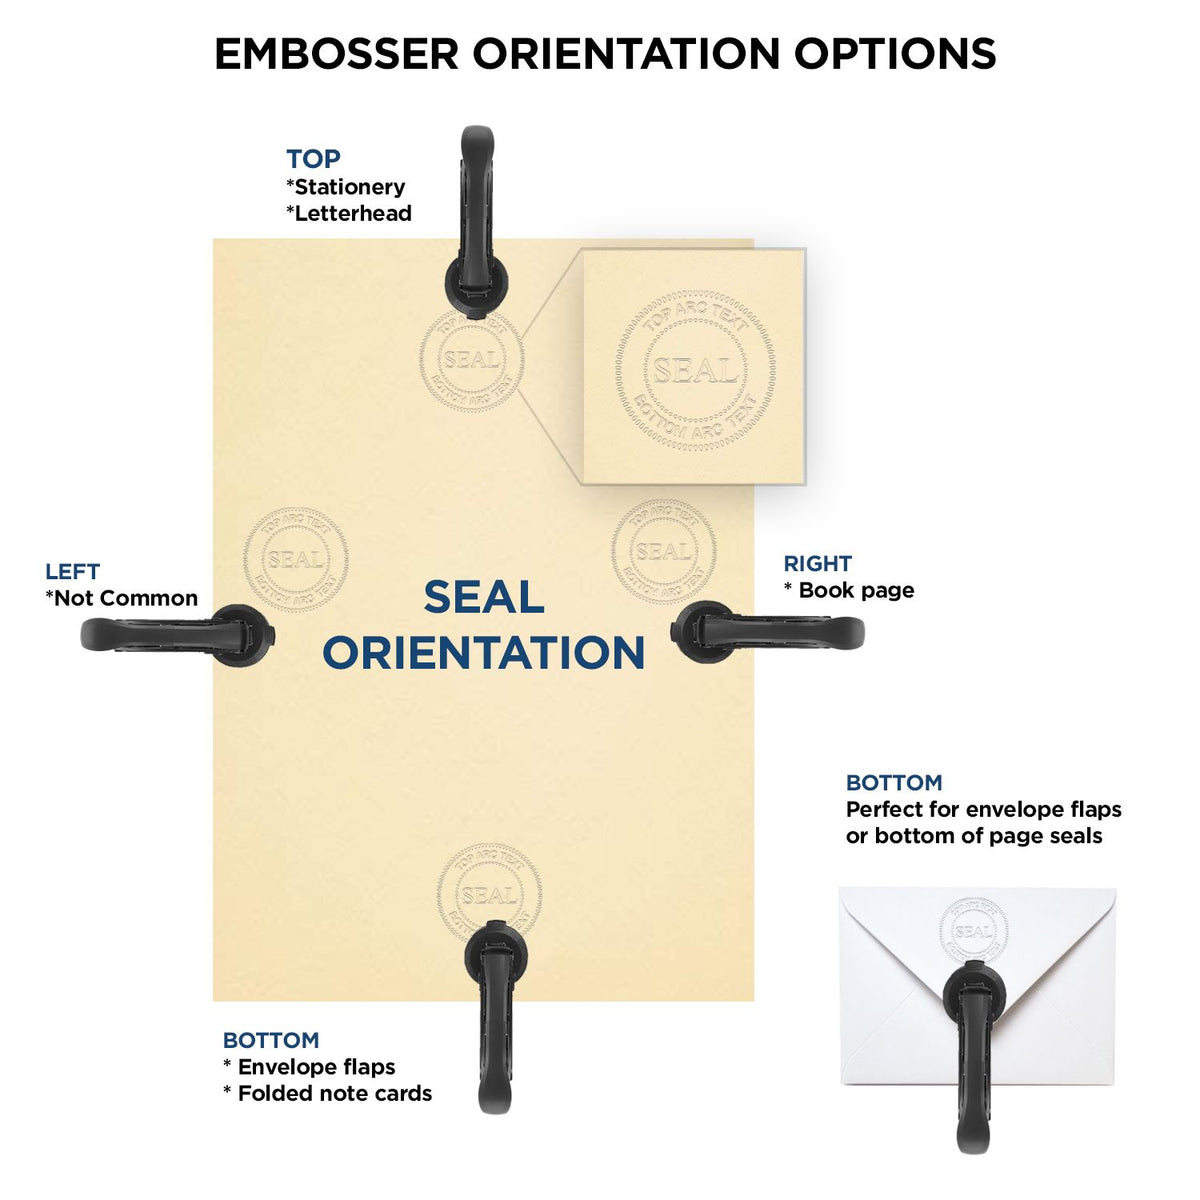 An infographic for the Indiana Engineer Desk Seal showing embosser orientation, this is showing examples of a top, bottom, right and left insert.